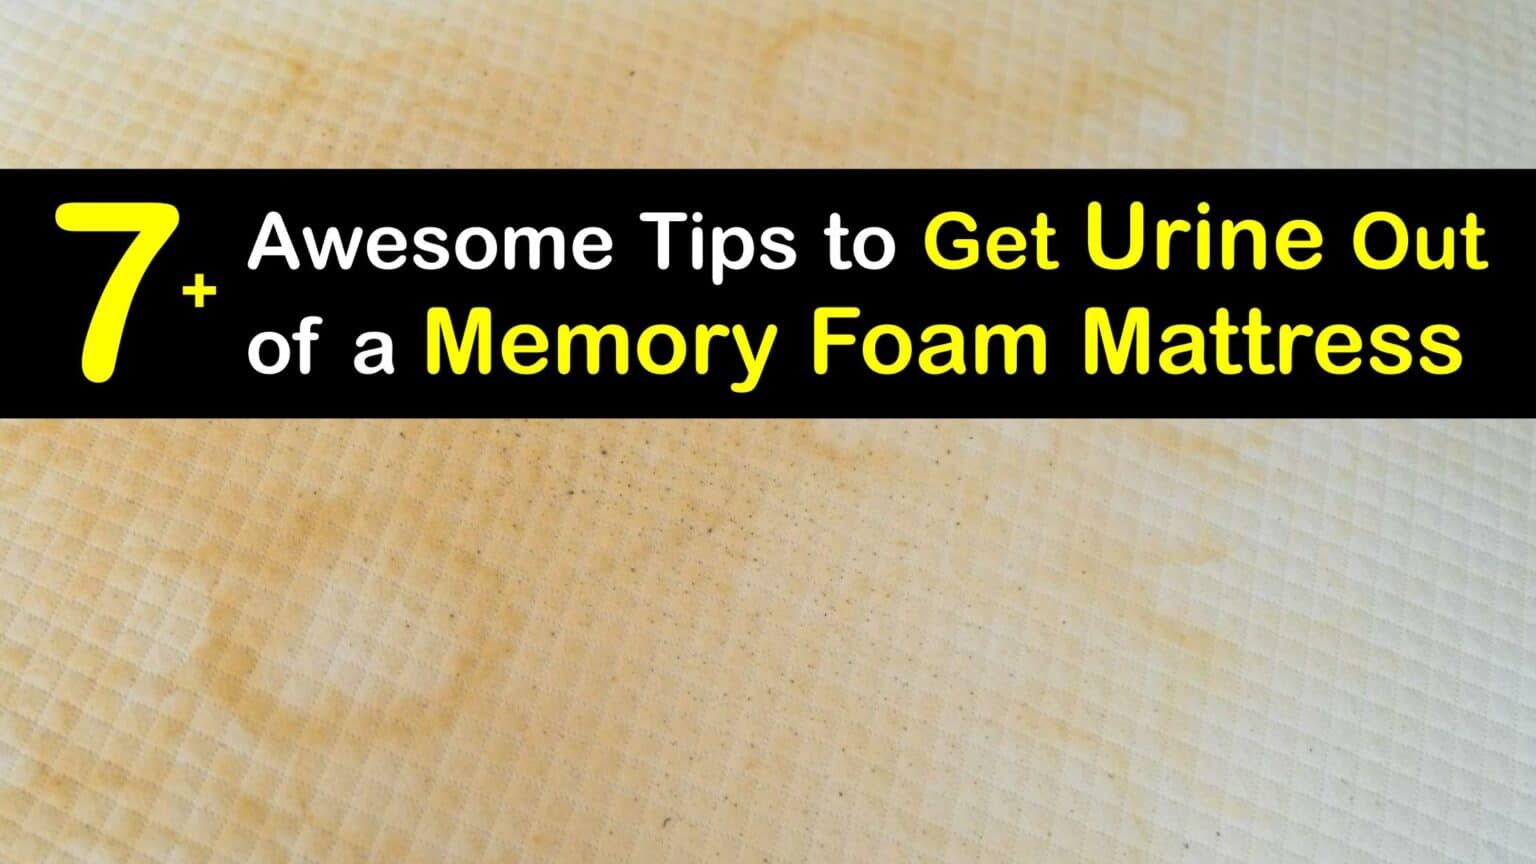 cleaning urine out of a foam mattress